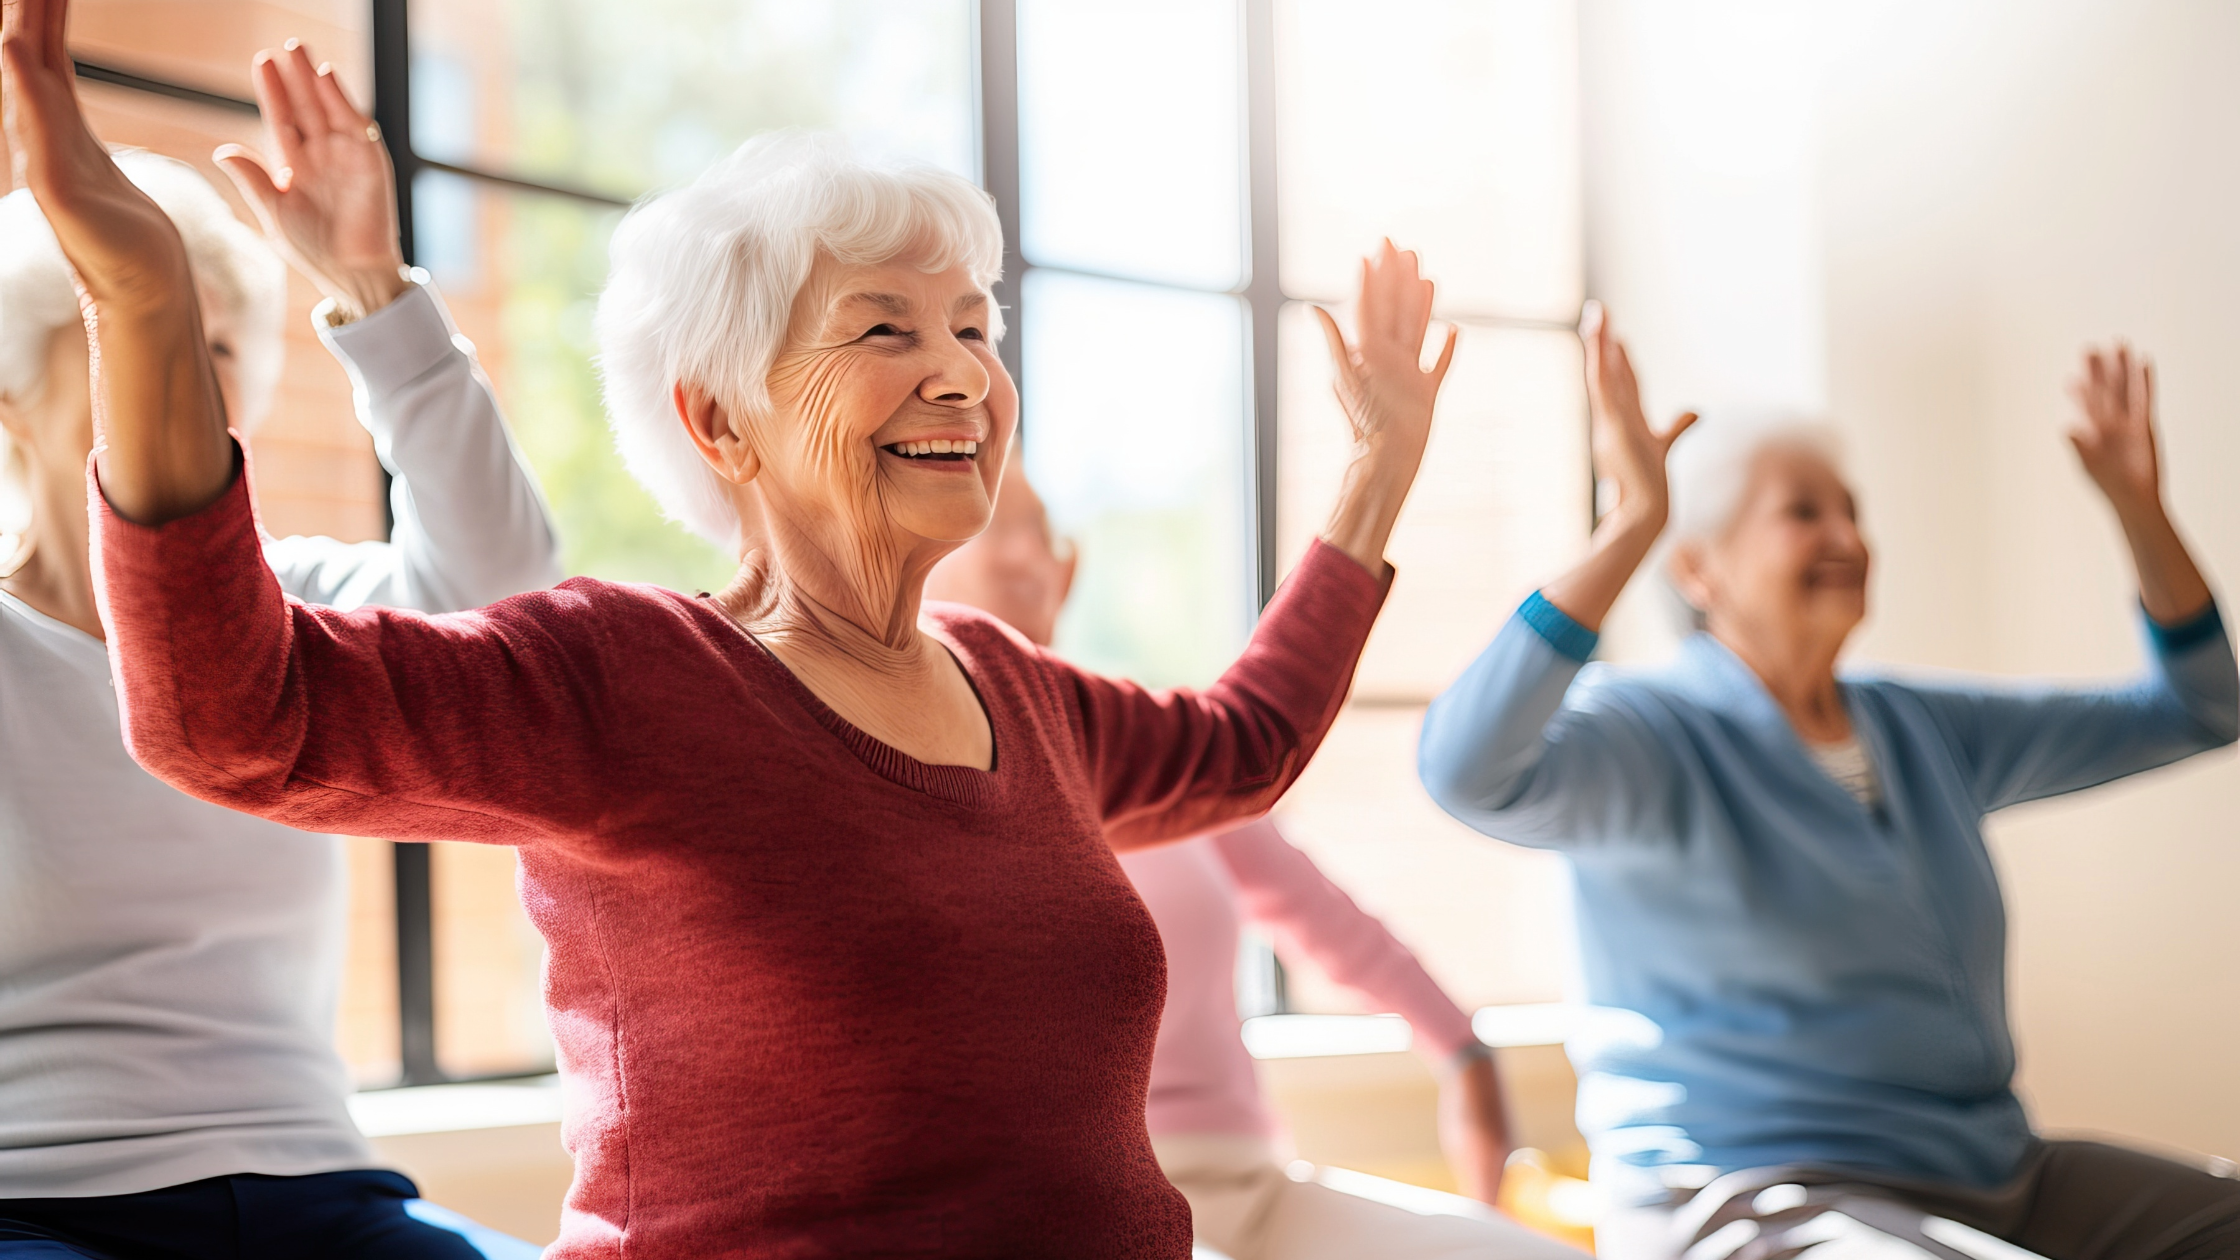 A group of seniors enthusiastically engages in exercise, showcasing the positive impact of patient engagement among the elderly. The image captures a moment of community and well-being as seniors participate in various exercises, promoting physical activity and social connection for a healthier and happier lifestyle